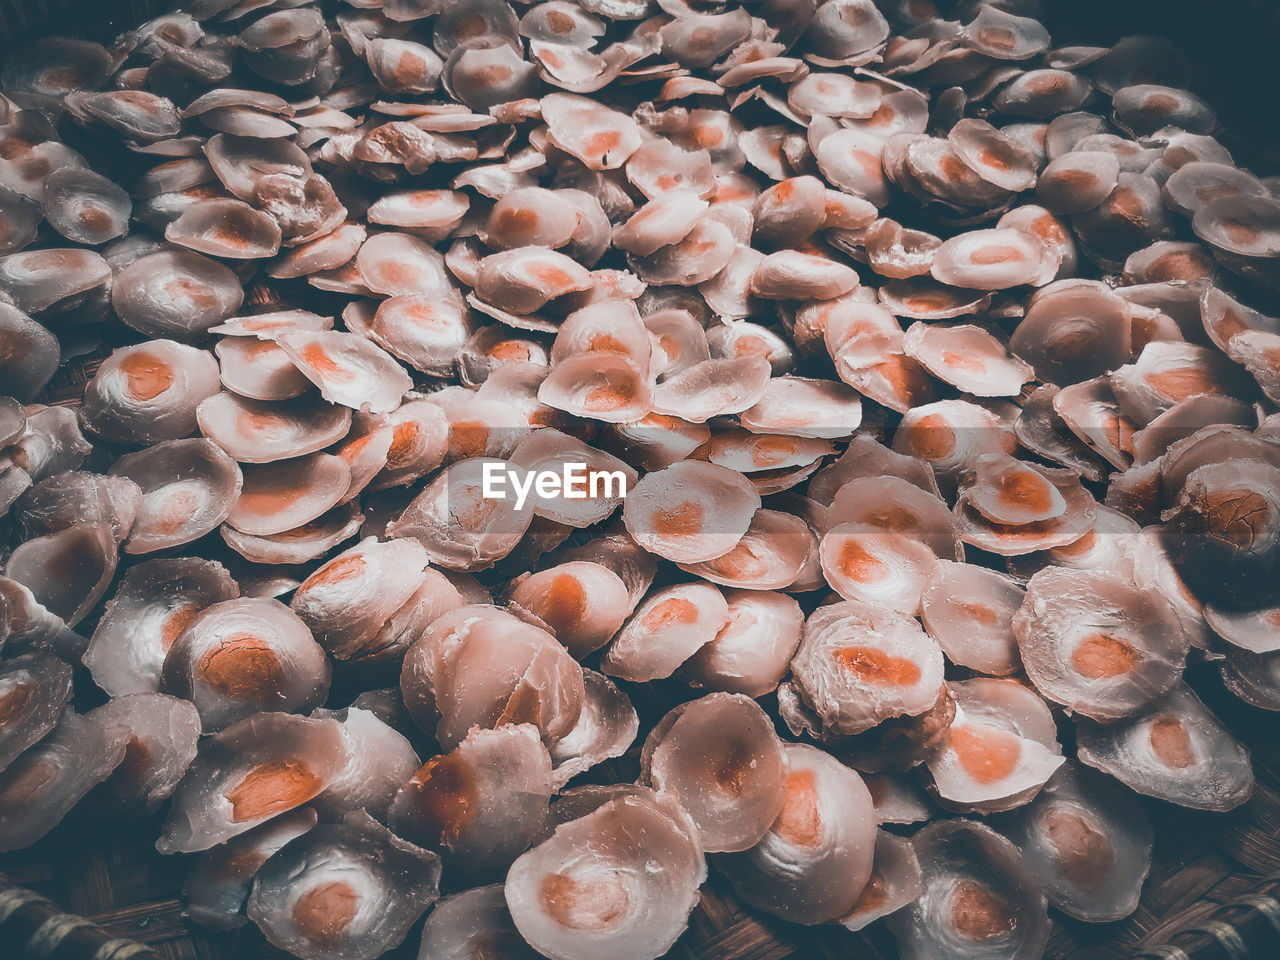 HIGH ANGLE VIEW OF SHELLS IN WATER